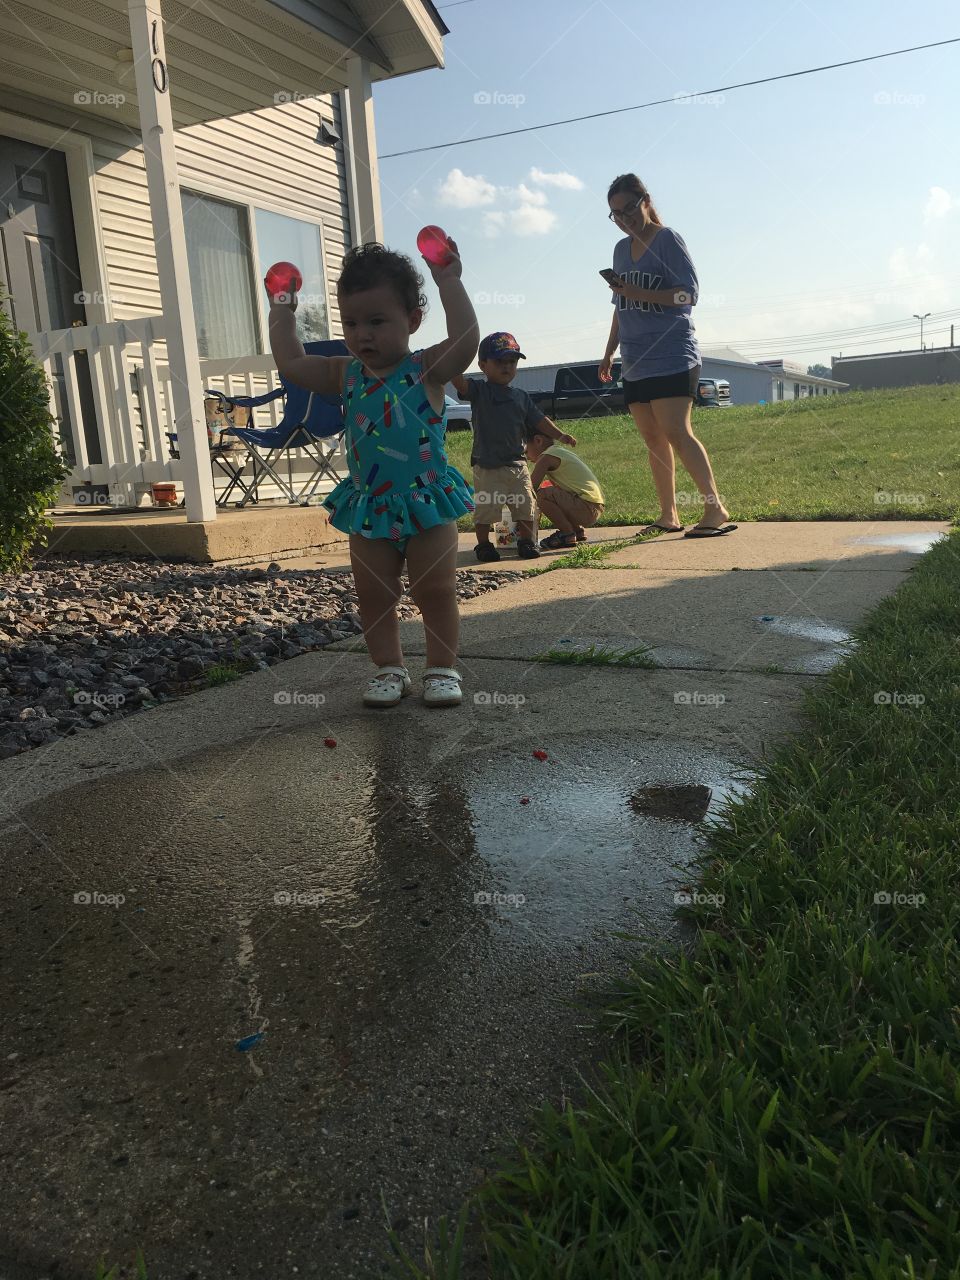 Toddler girl water ballon play :) it was 85 degrees which was perfect for water play outside! She is about to break her balloons 